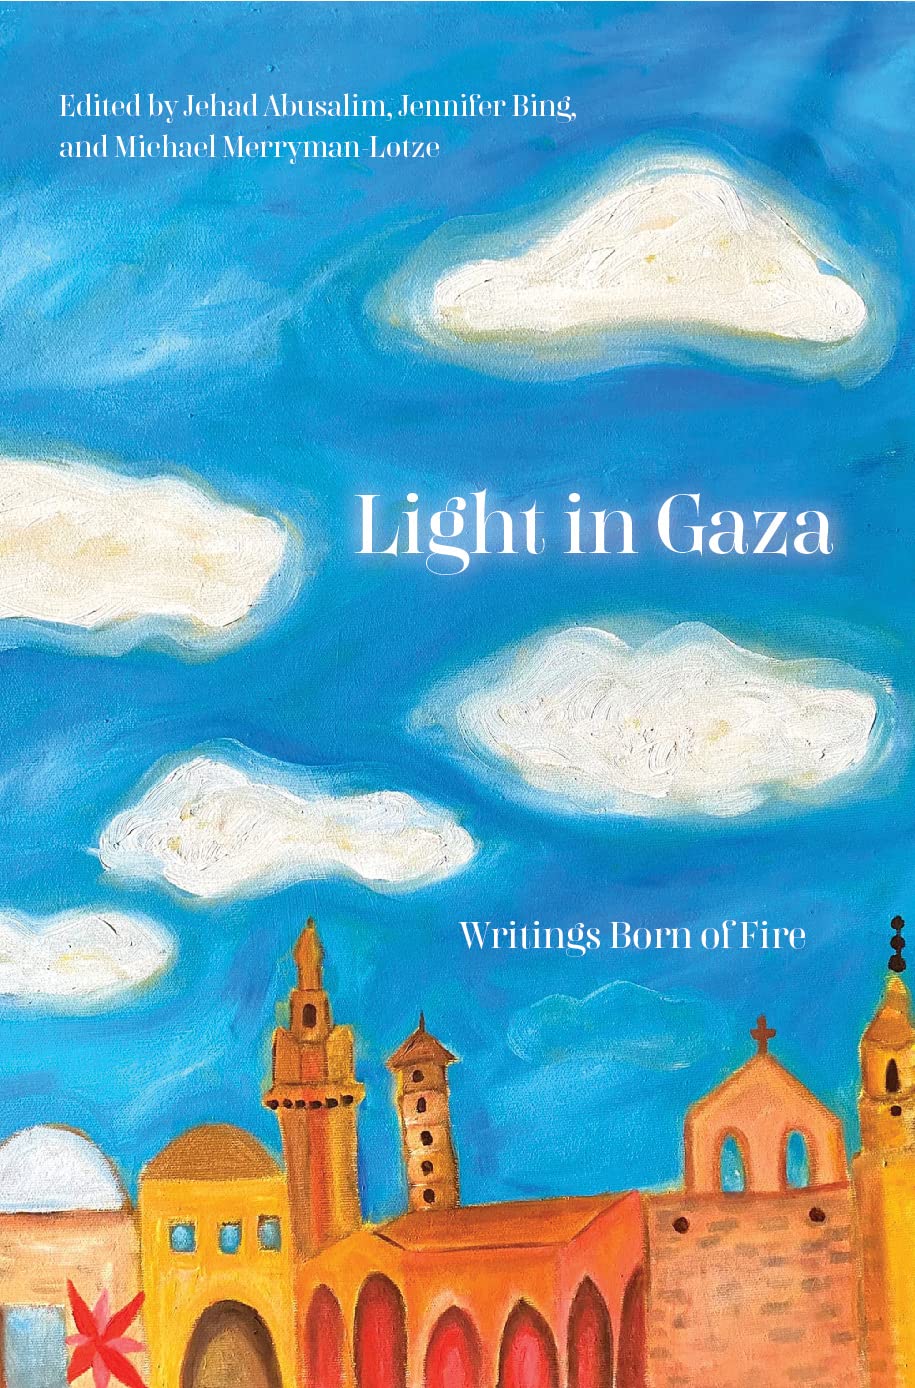 Light in Gaza: Writings Born of Fire (Hardcover)